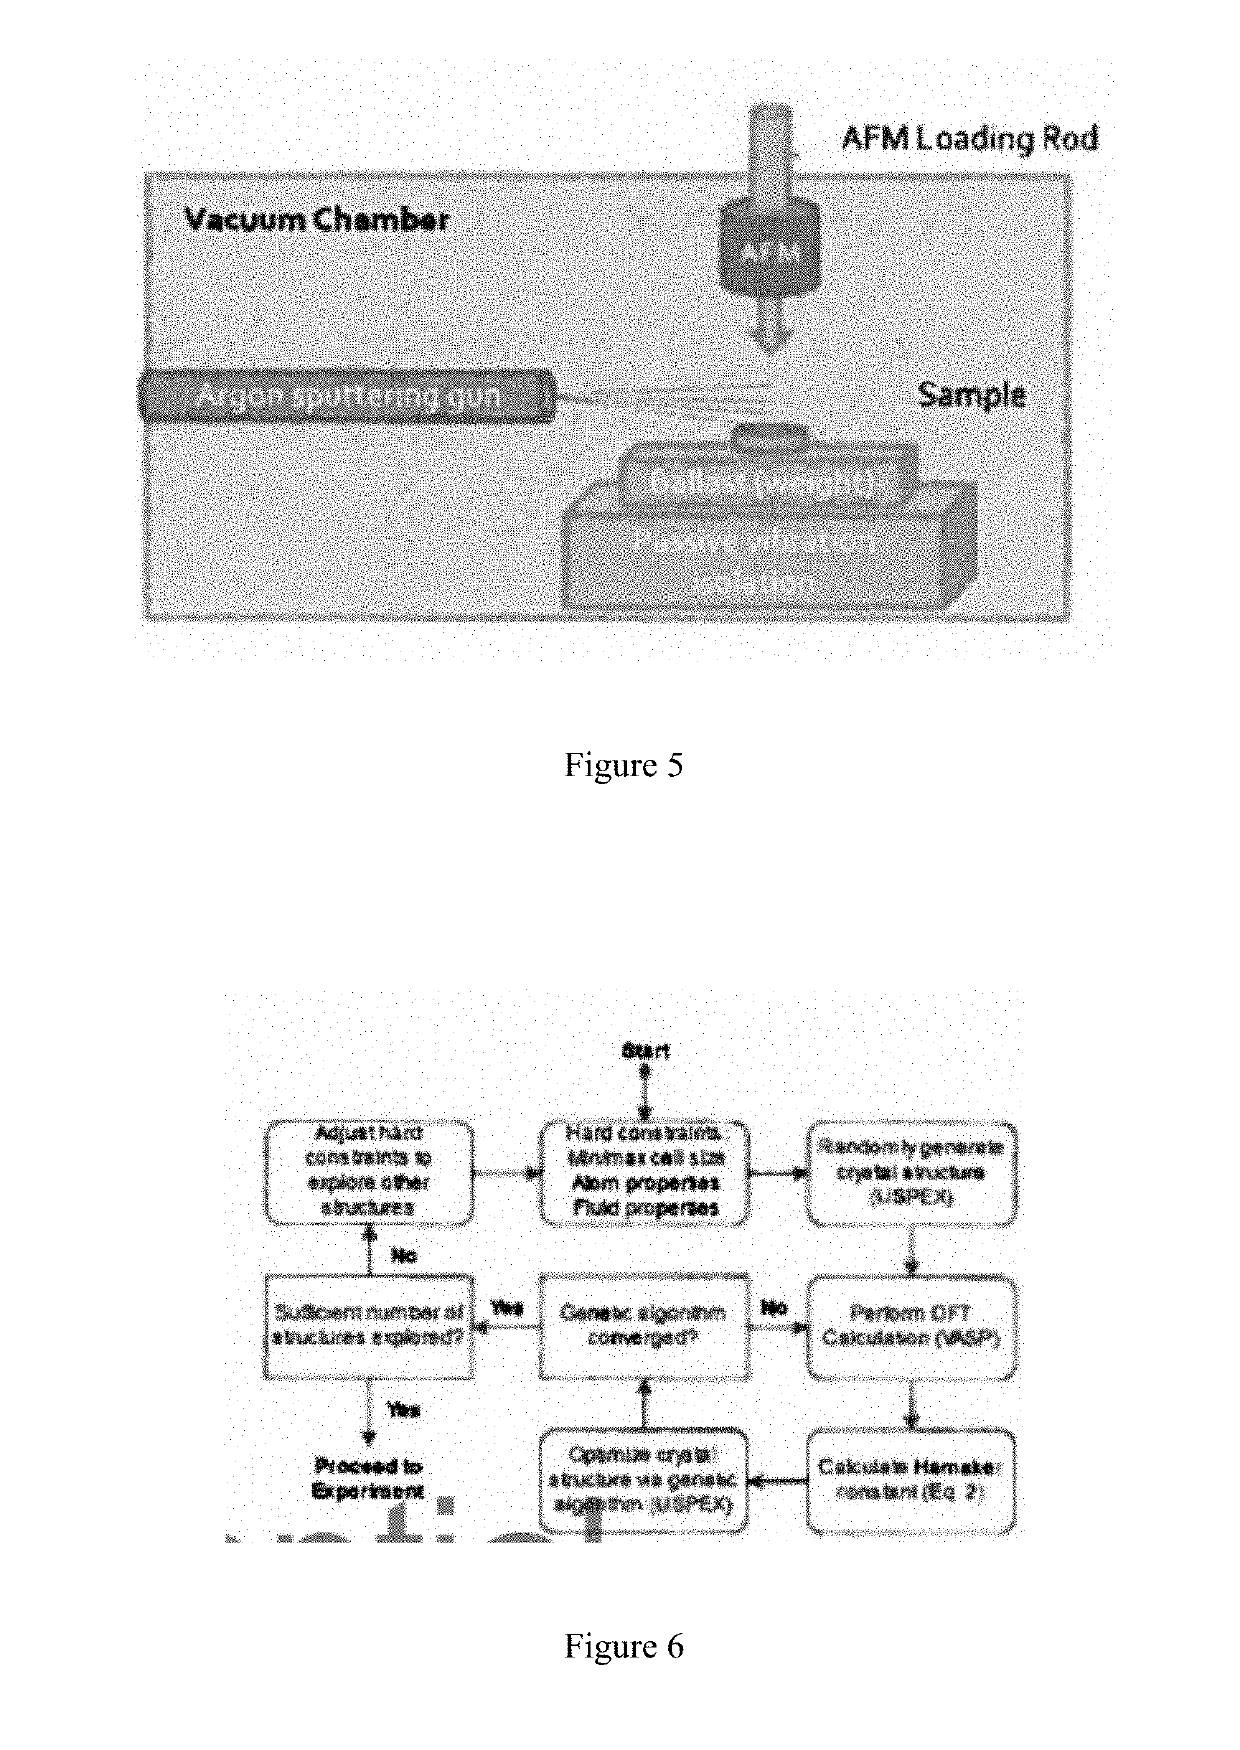 Materials that Resist Fouling and Methods for Identifying Same